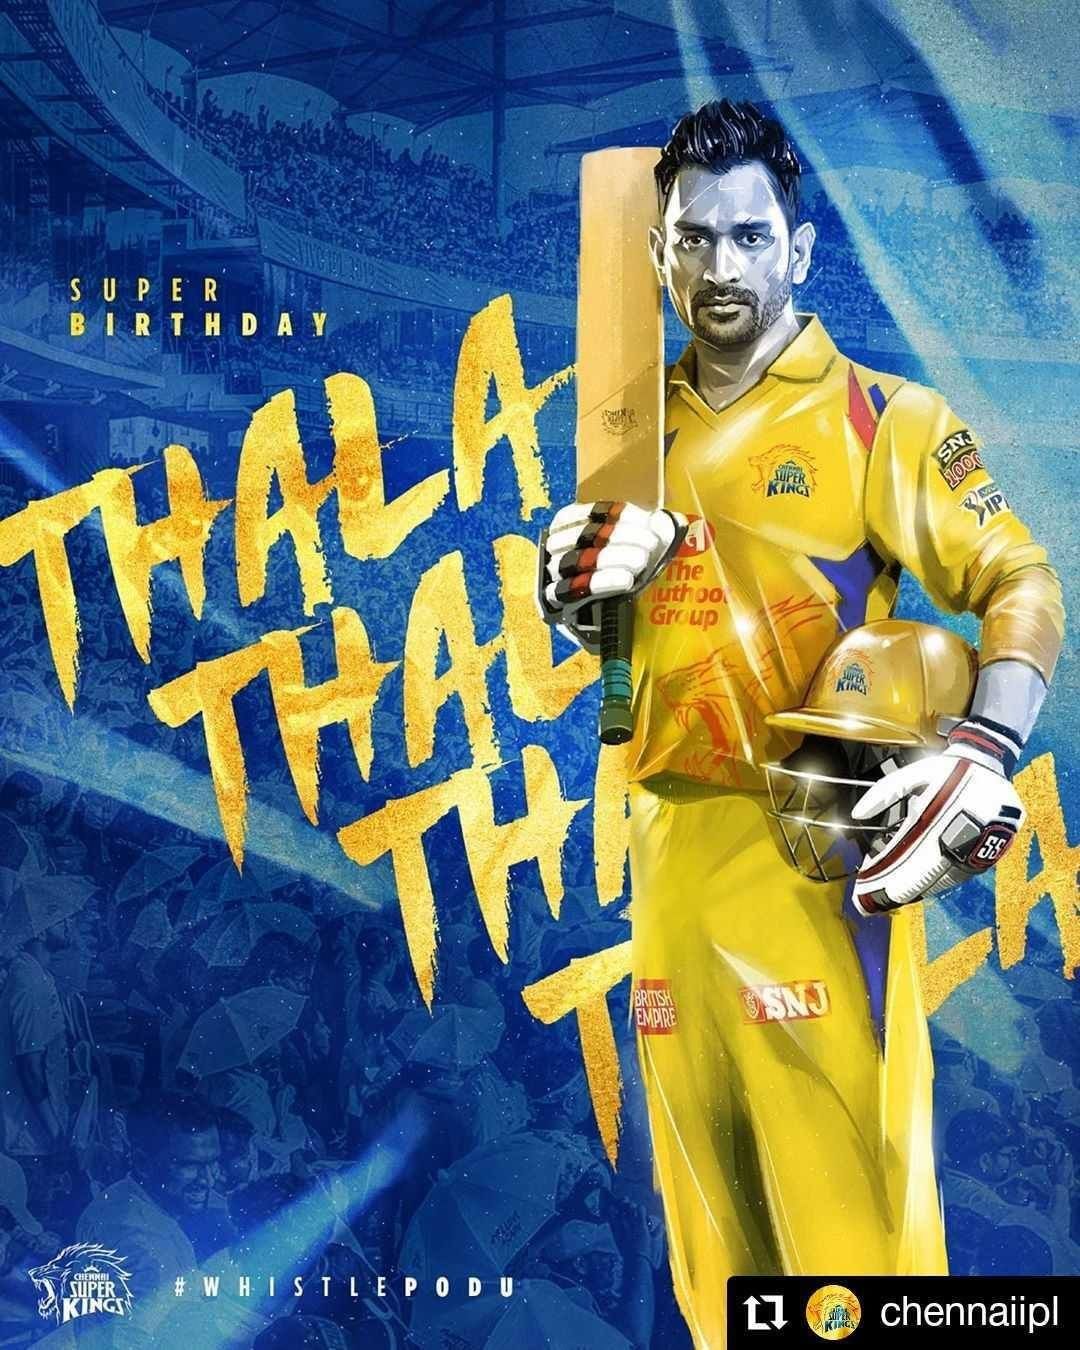 The Souled Store - Wishing the one and only #ThalaDhoni a very happy birthday!

We are celebrating with a special 'Thala Birthday Sale.' Click on the link in bio to shop now!
.
.
.
.
.
#TheSouledStore...